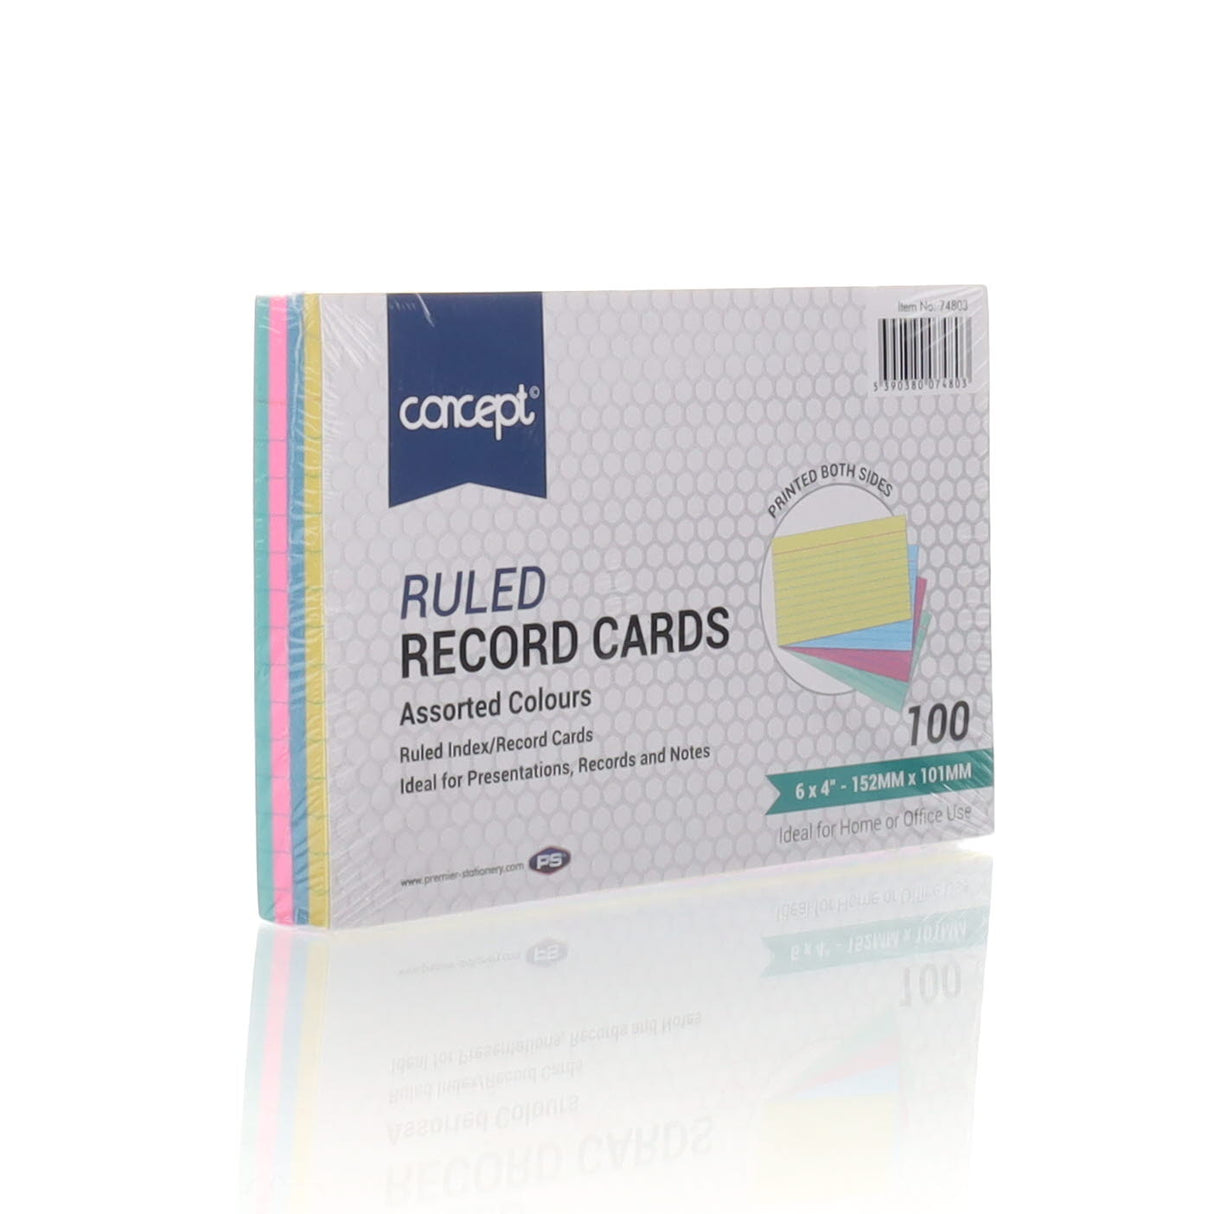 Concept 6 x 4 Ruled Record Cards - Colour - Pack of 100 | Stationery Shop UK